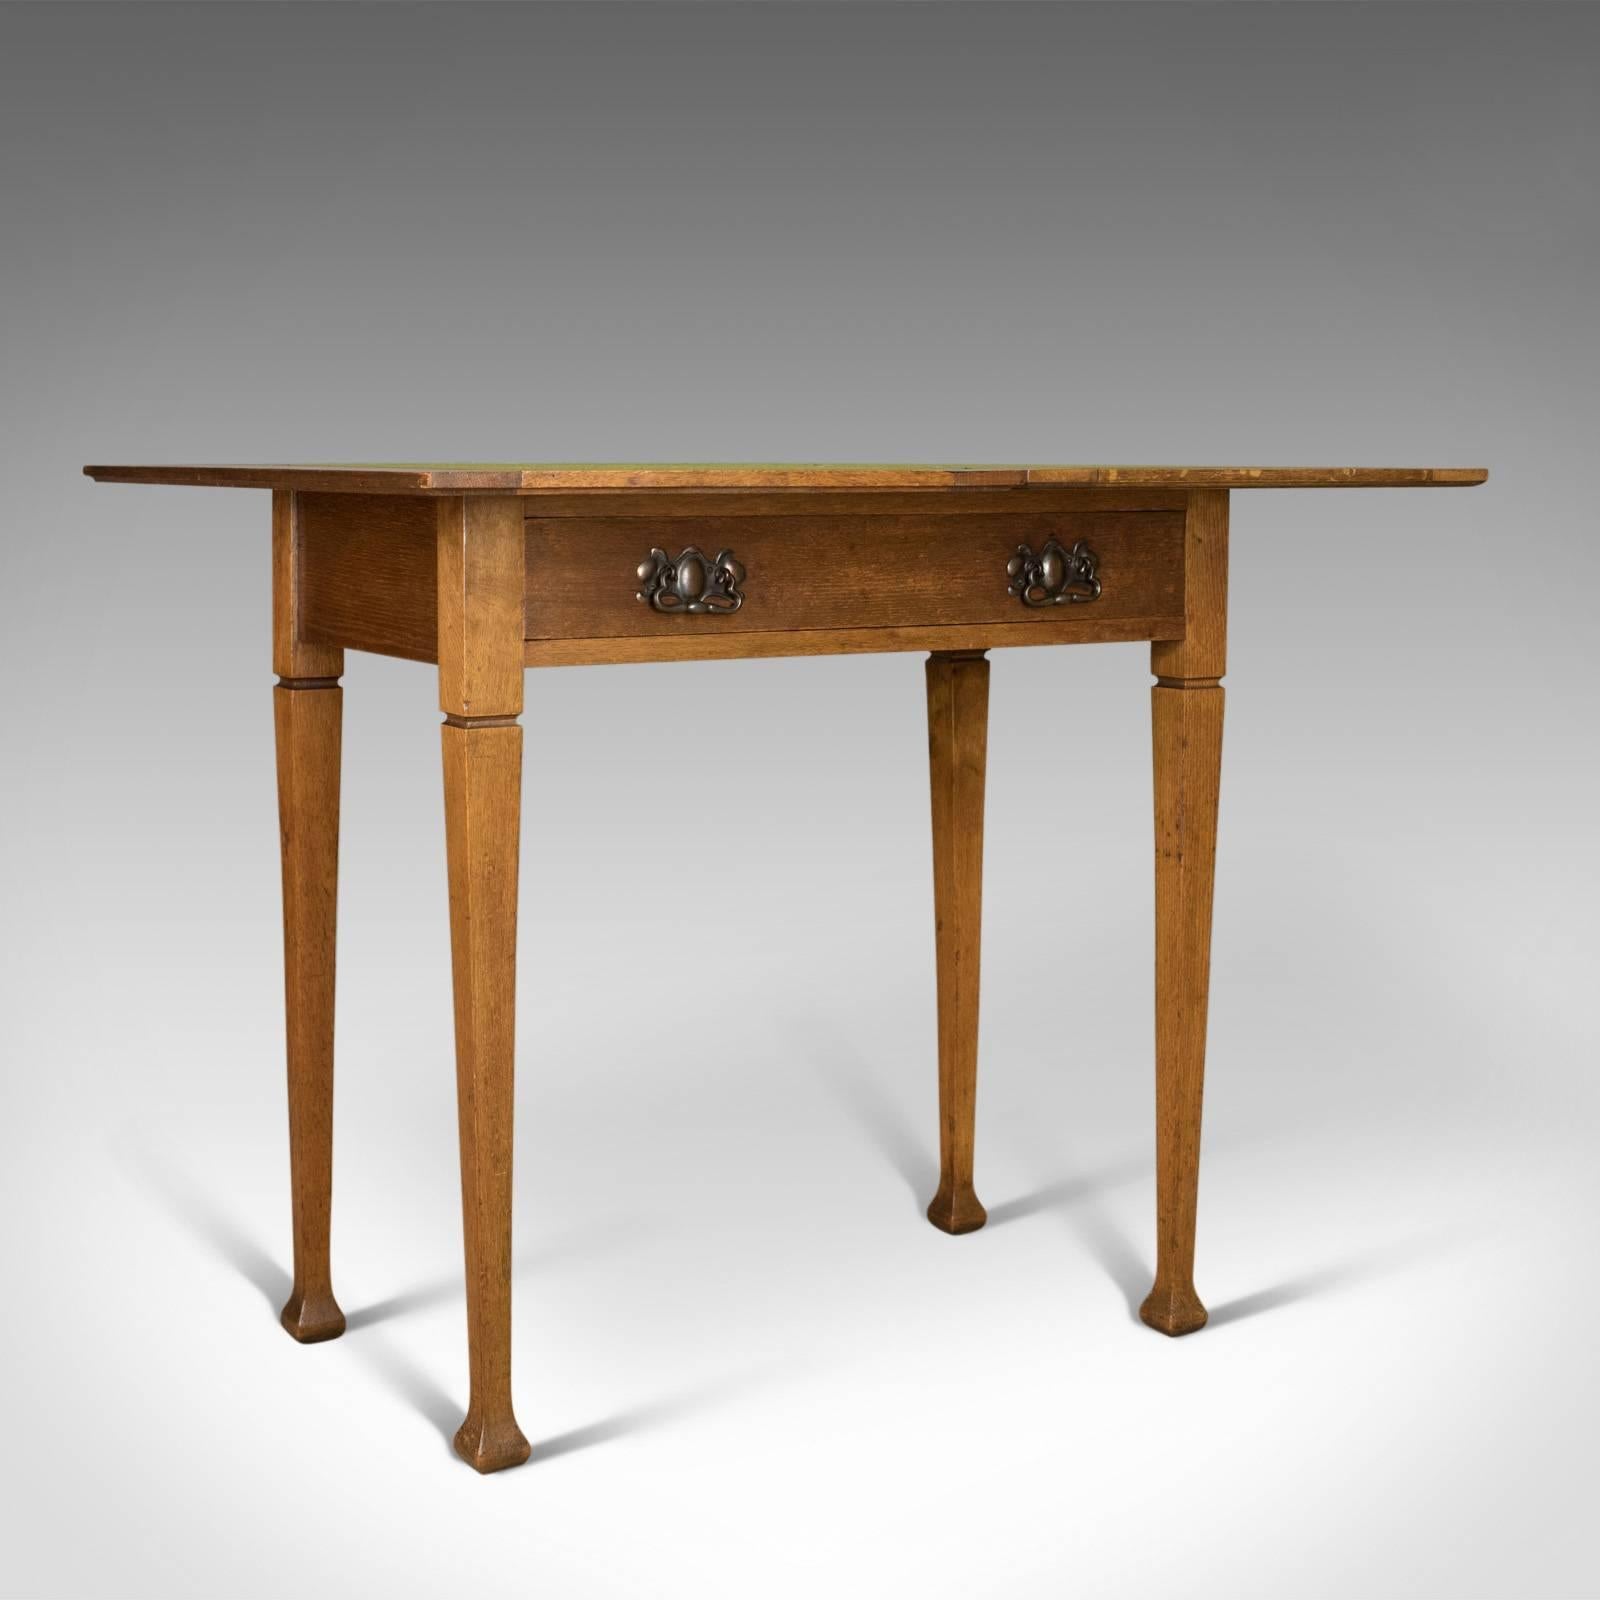 20th Century Antique Card Table, English, Arts & Crafts, Fold-Over Games Table, circa 1915